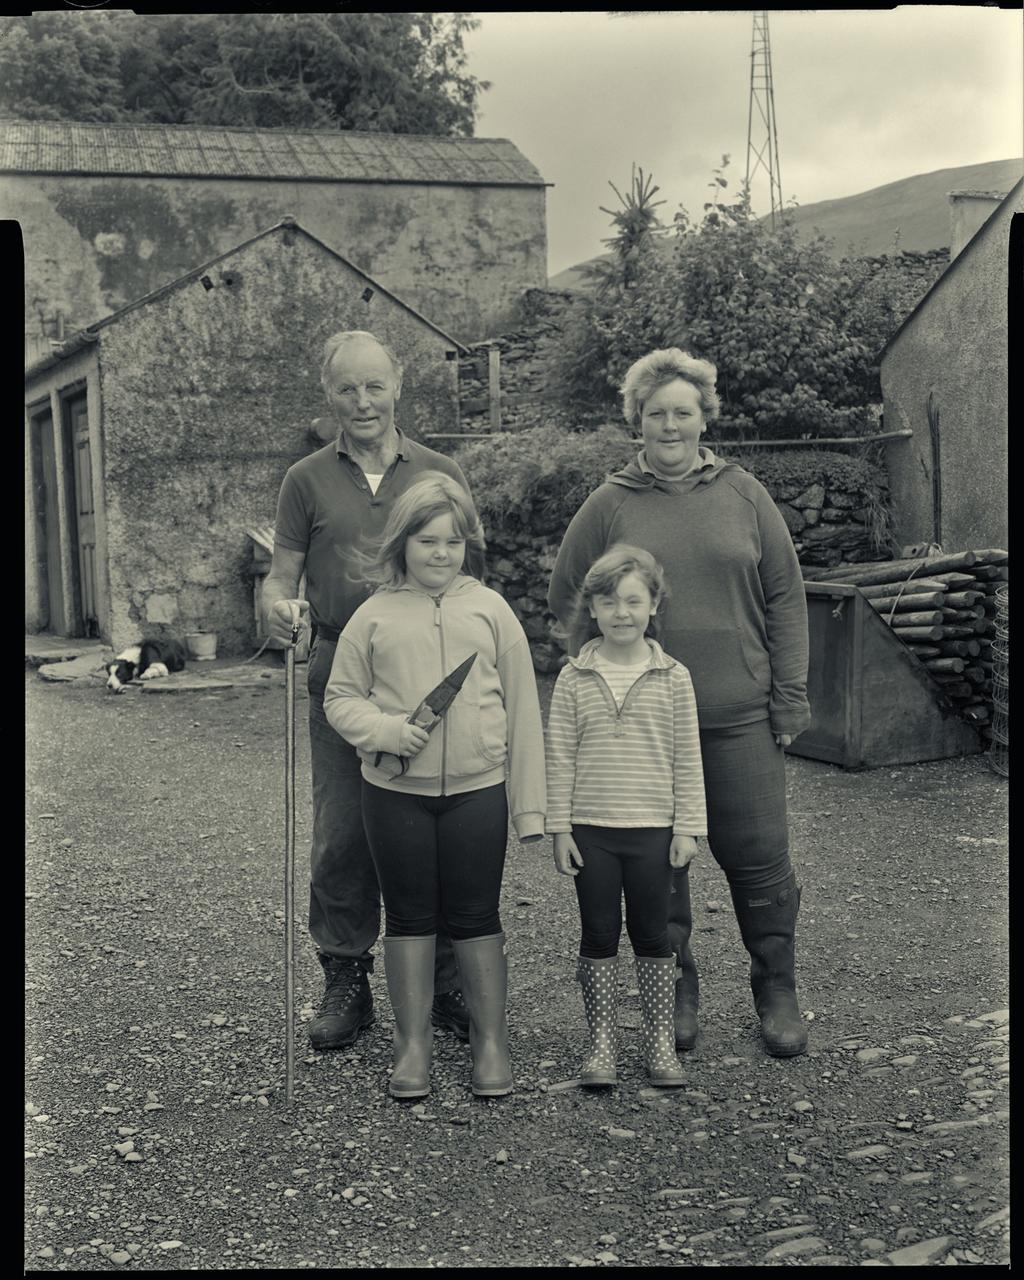 Her mother and father, Judith and Frank Capstick, live in the farmhouse here but have given over most of the farm work now to Sarah. Sarah lives in Sedbergh with her husband, Paul, who is a builder.